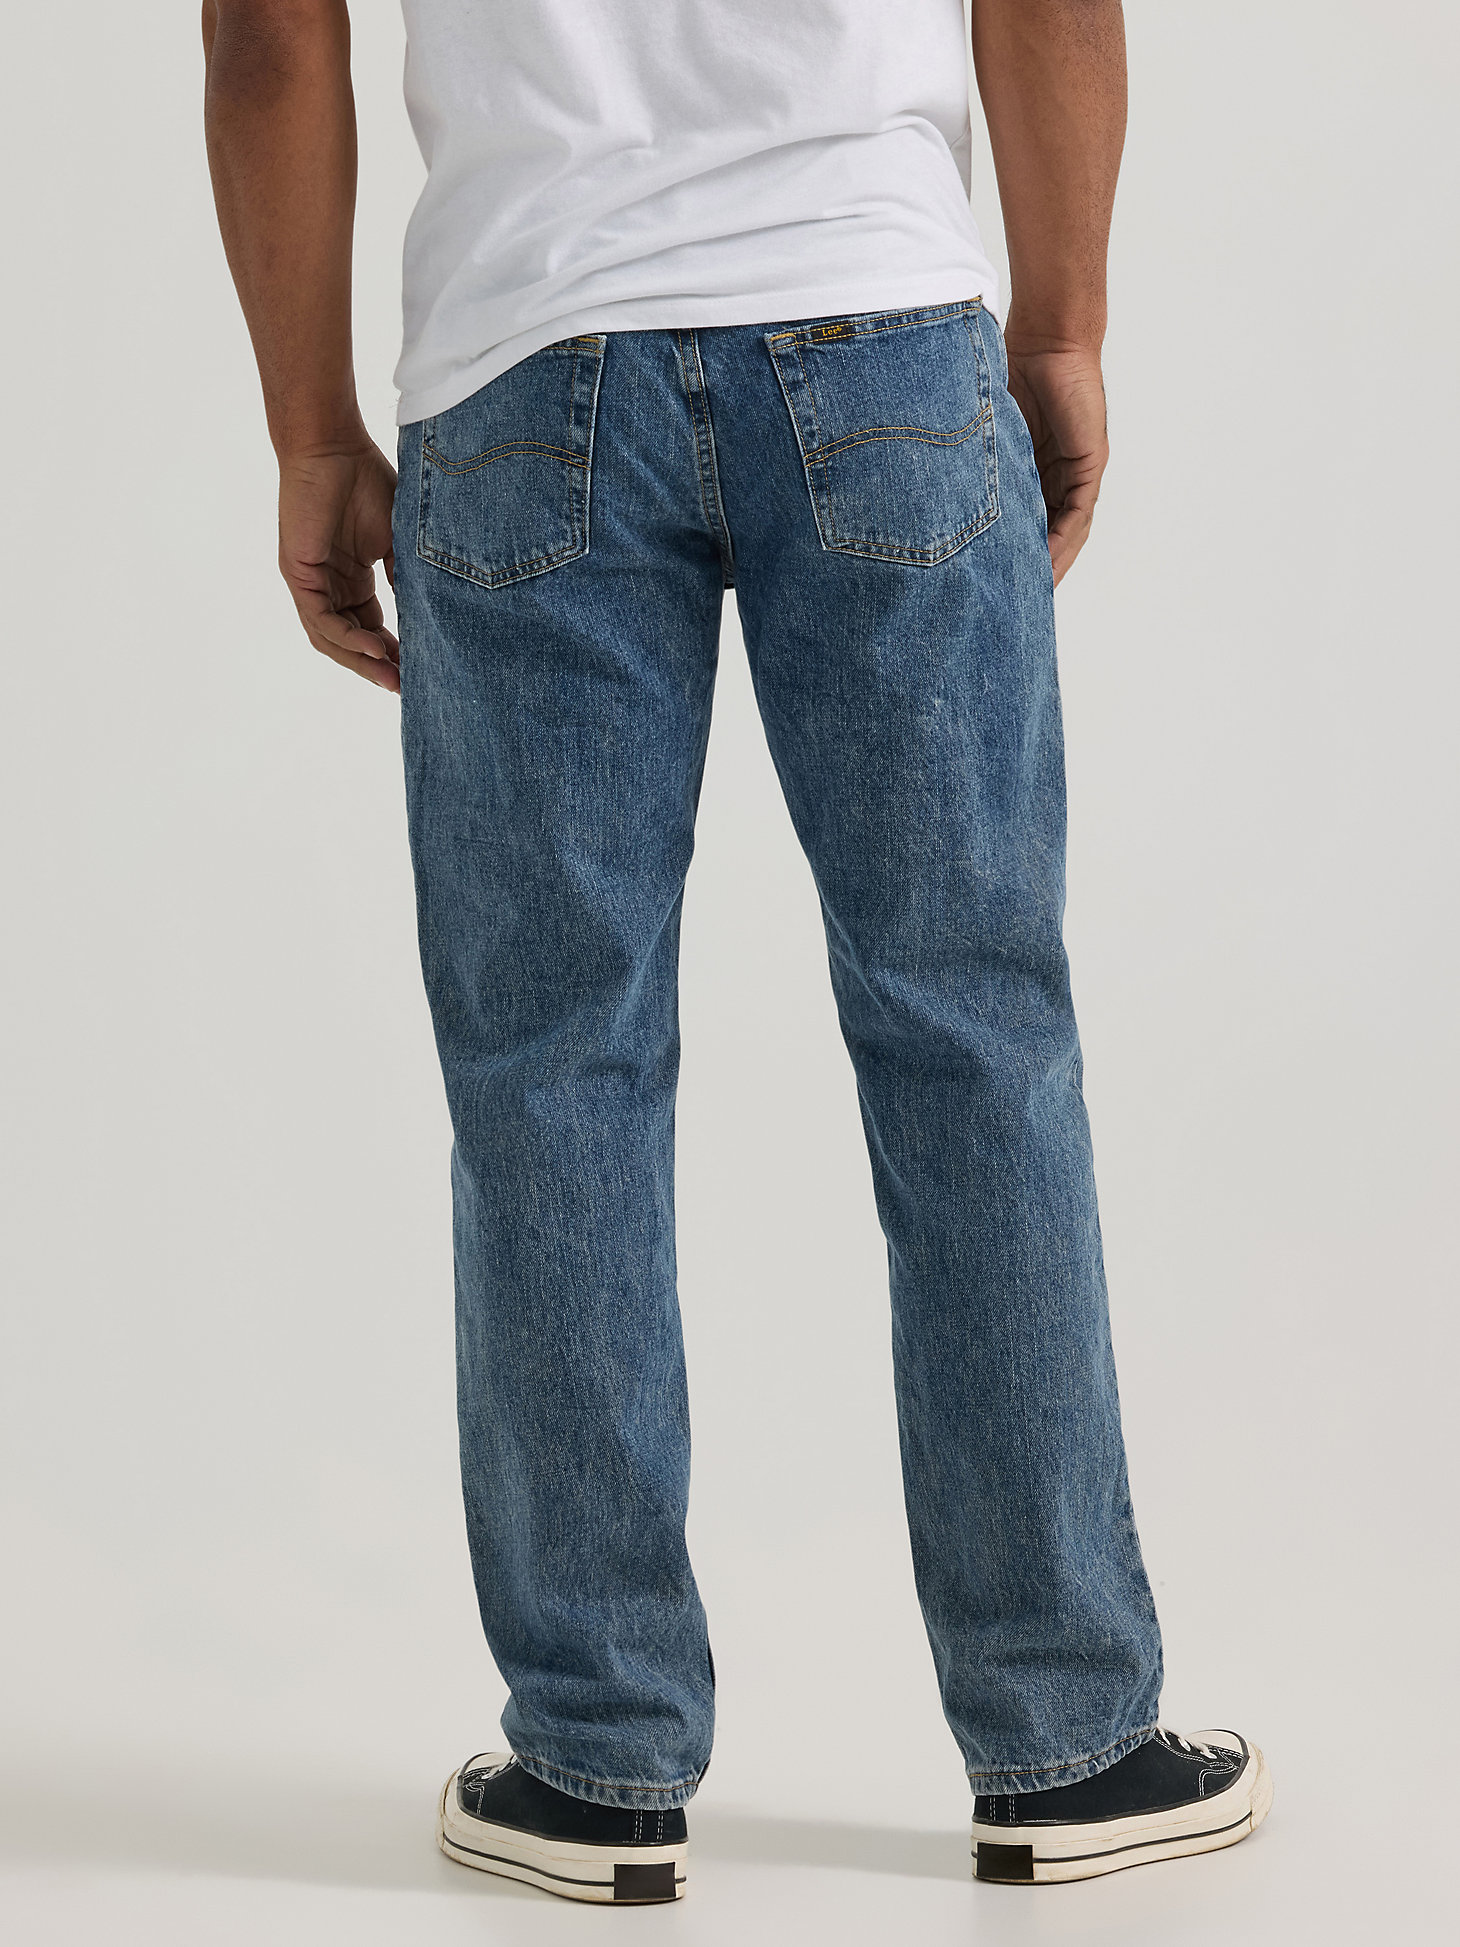 Men’s Relaxed Fit Straight Leg Jeans in Medium Stone alternative view 2